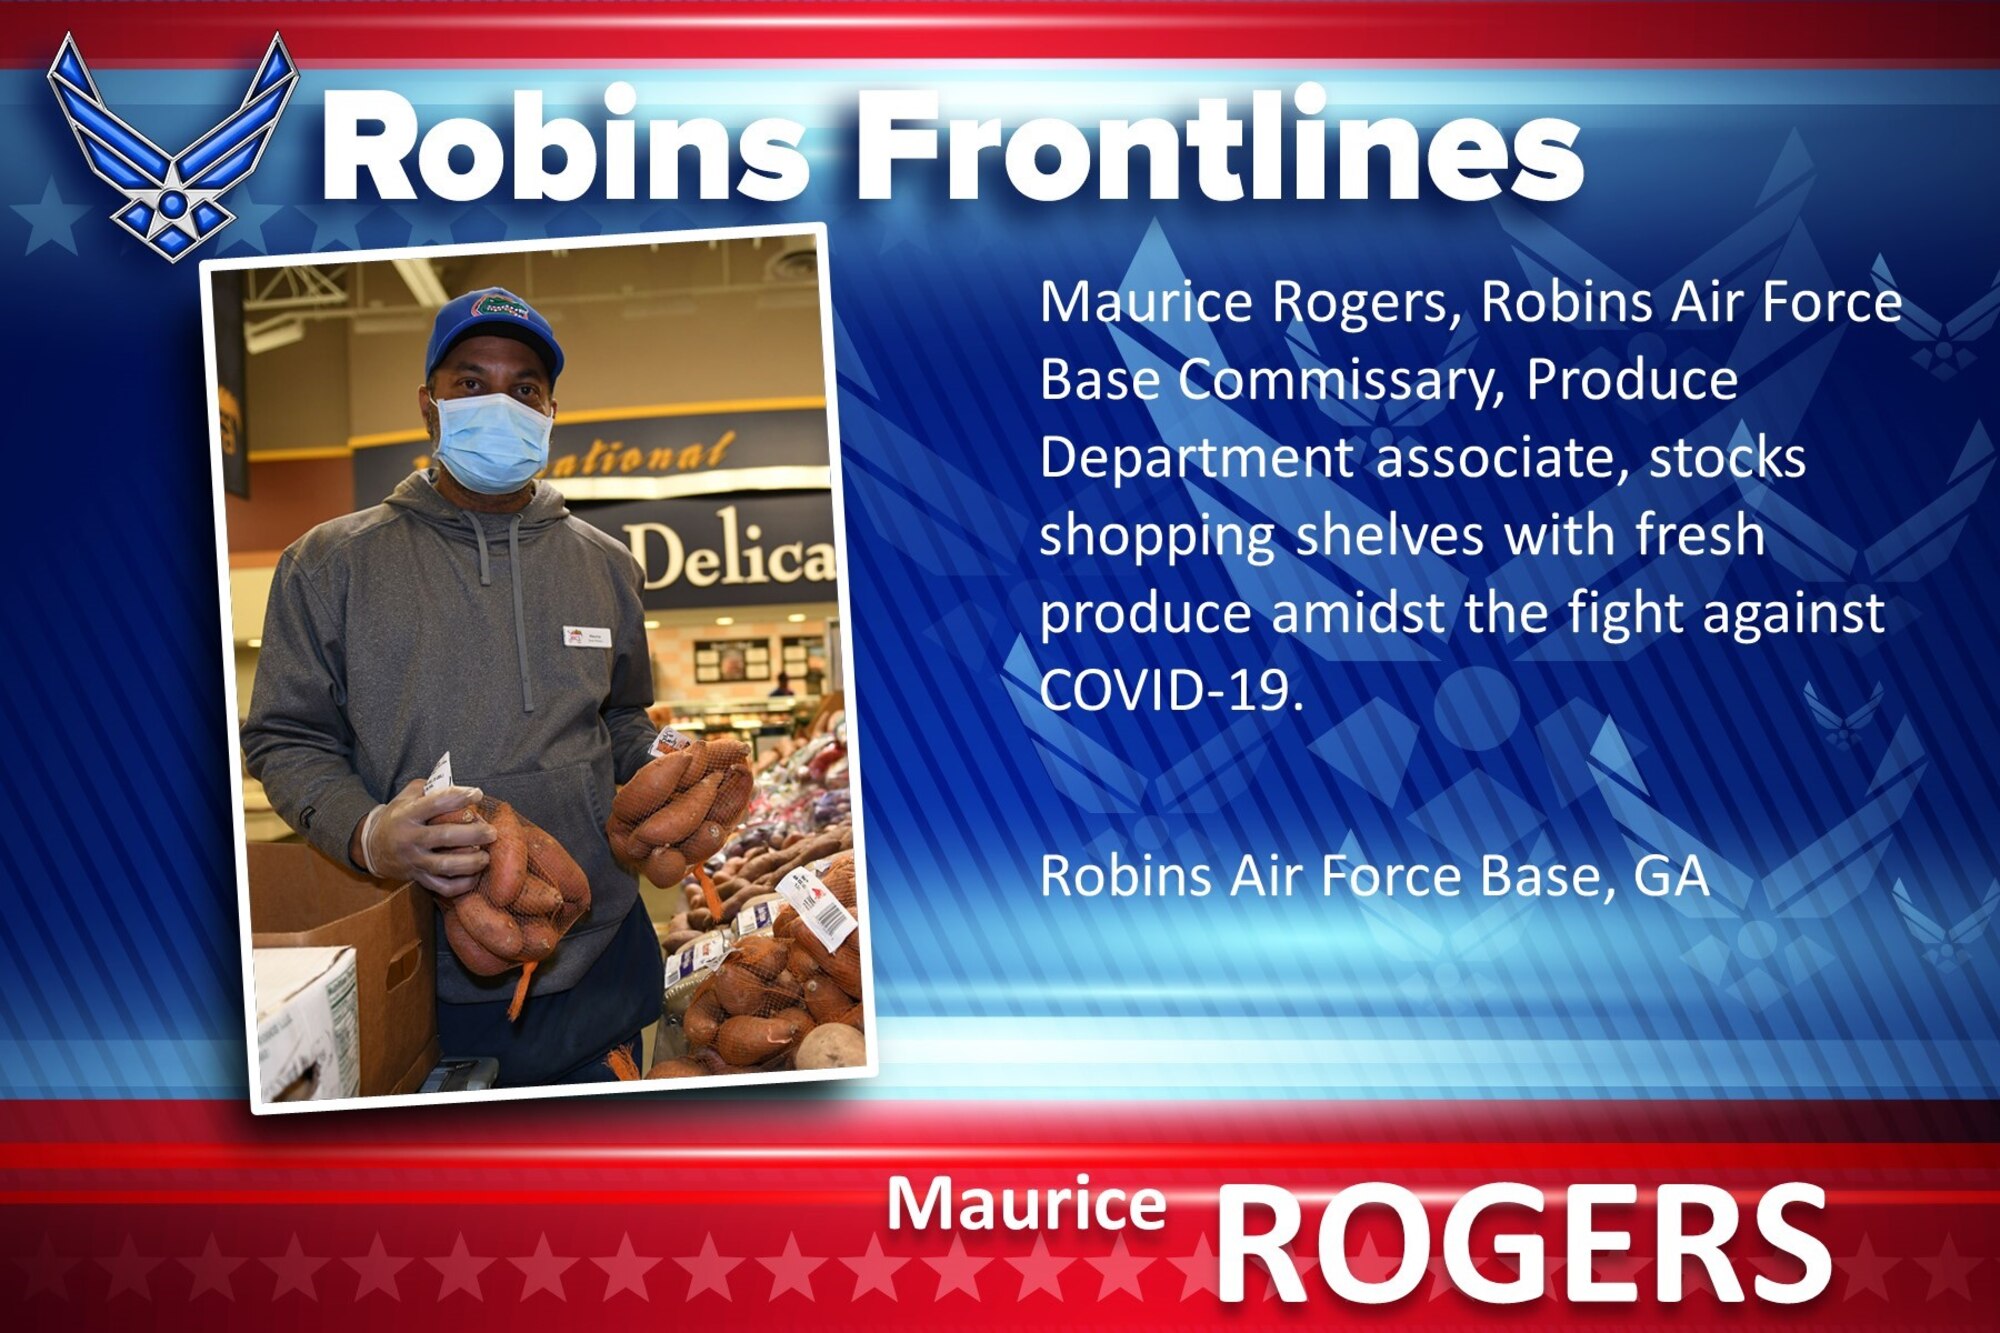 Robins Frontlines: Maurice Rogers